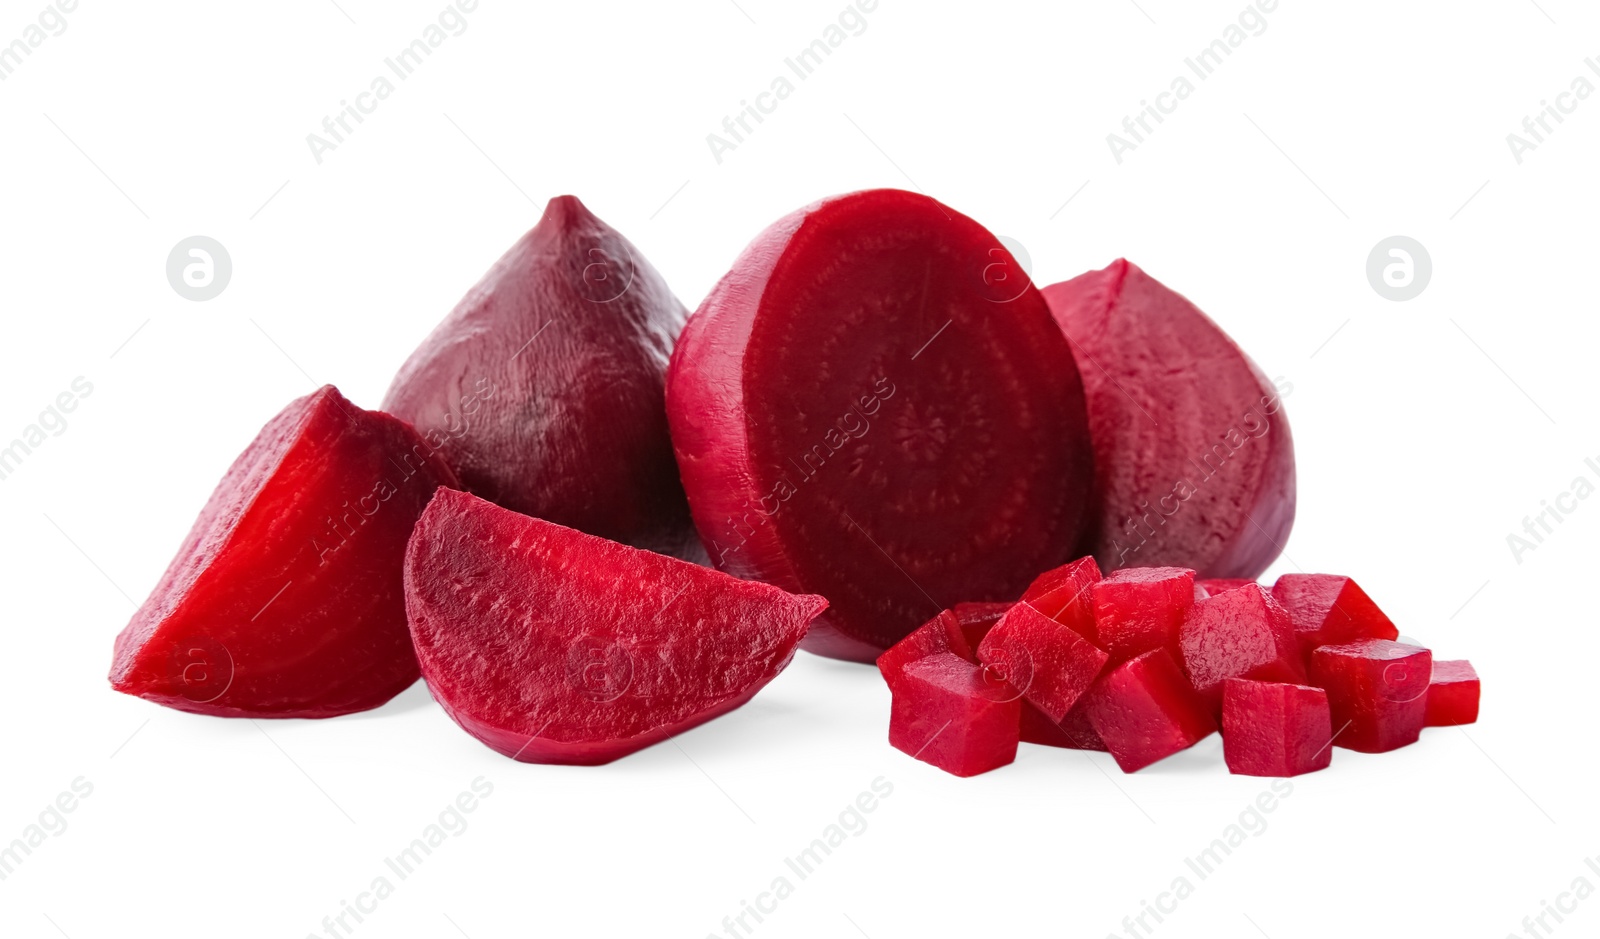 Photo of Whole and cut boiled red beets on white background